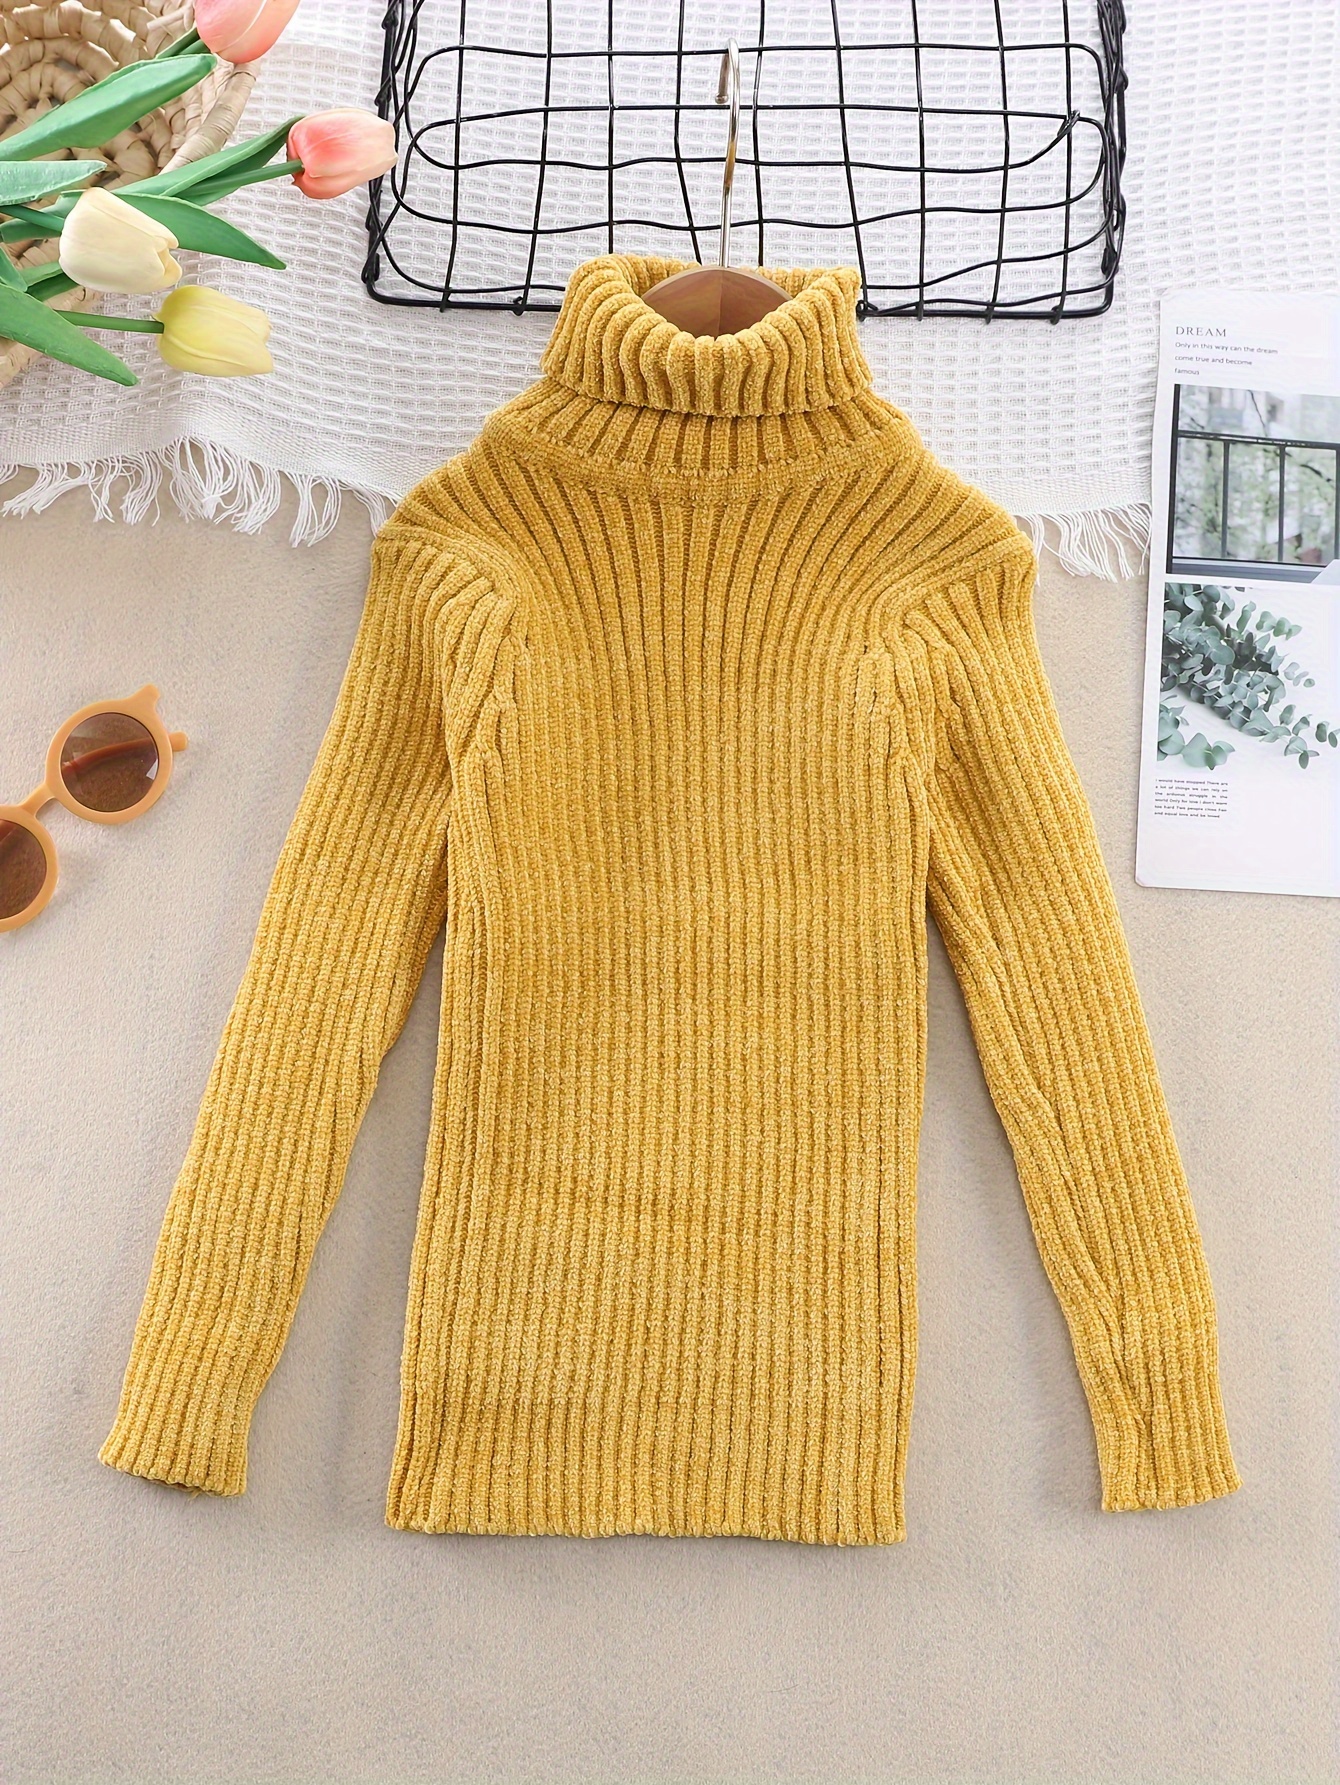 Mustard Yellow Sweater - Chenille Knit Sweater - Pullover Sweater